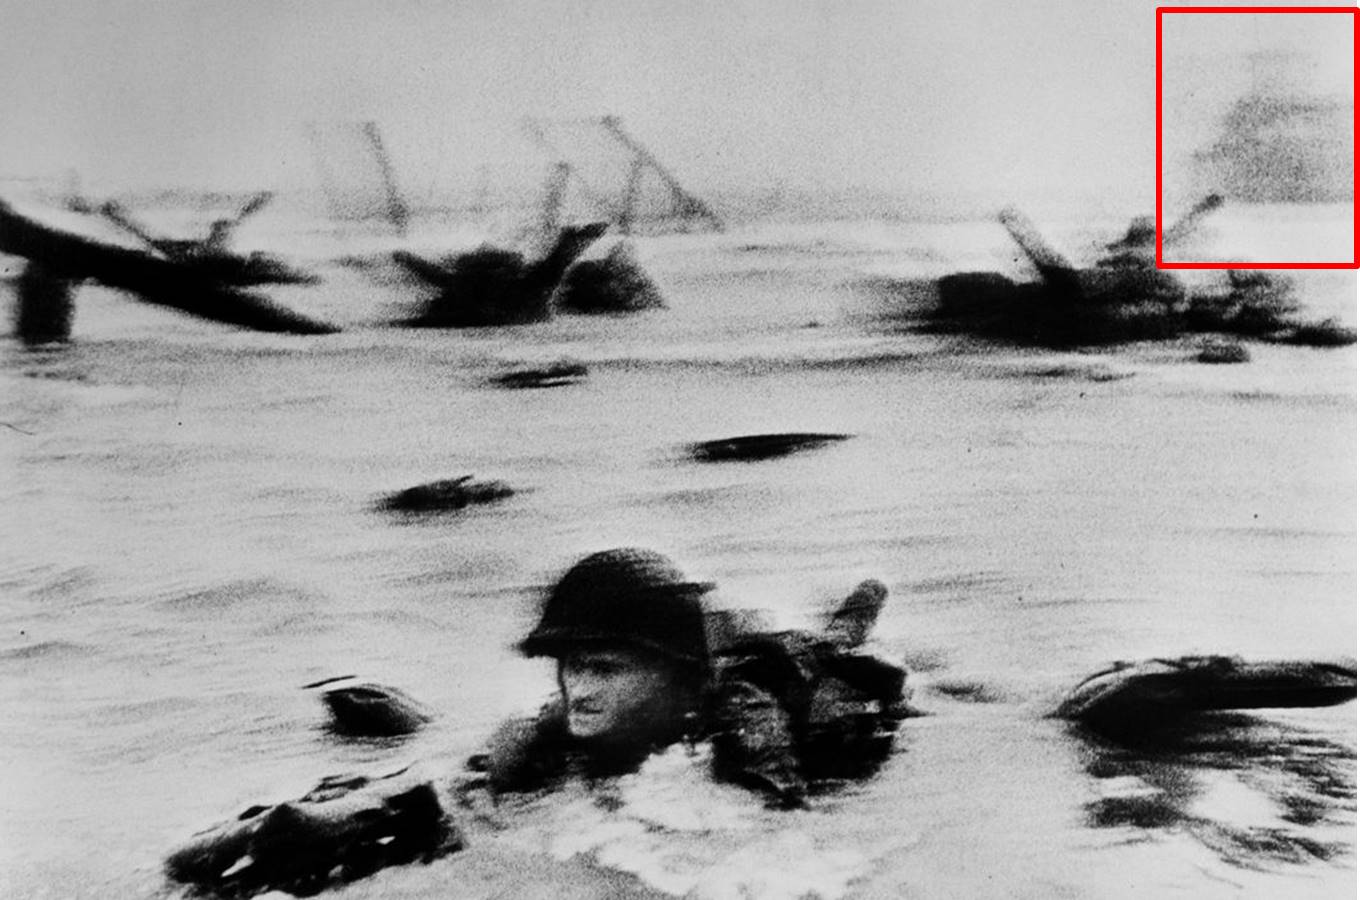 16 - Robert Capa, photo C37, The Face in the Surf, annotated by Charles Herrick. The silhouette of the LCI(L)-94, aboard which Capa joined the USS Samuel Chase after Omaha Beach, appears in the red rectangle at upper right. Source: Guest Post 28: Charles Herrick on Capa's D-Day (j), June 6, 2019.